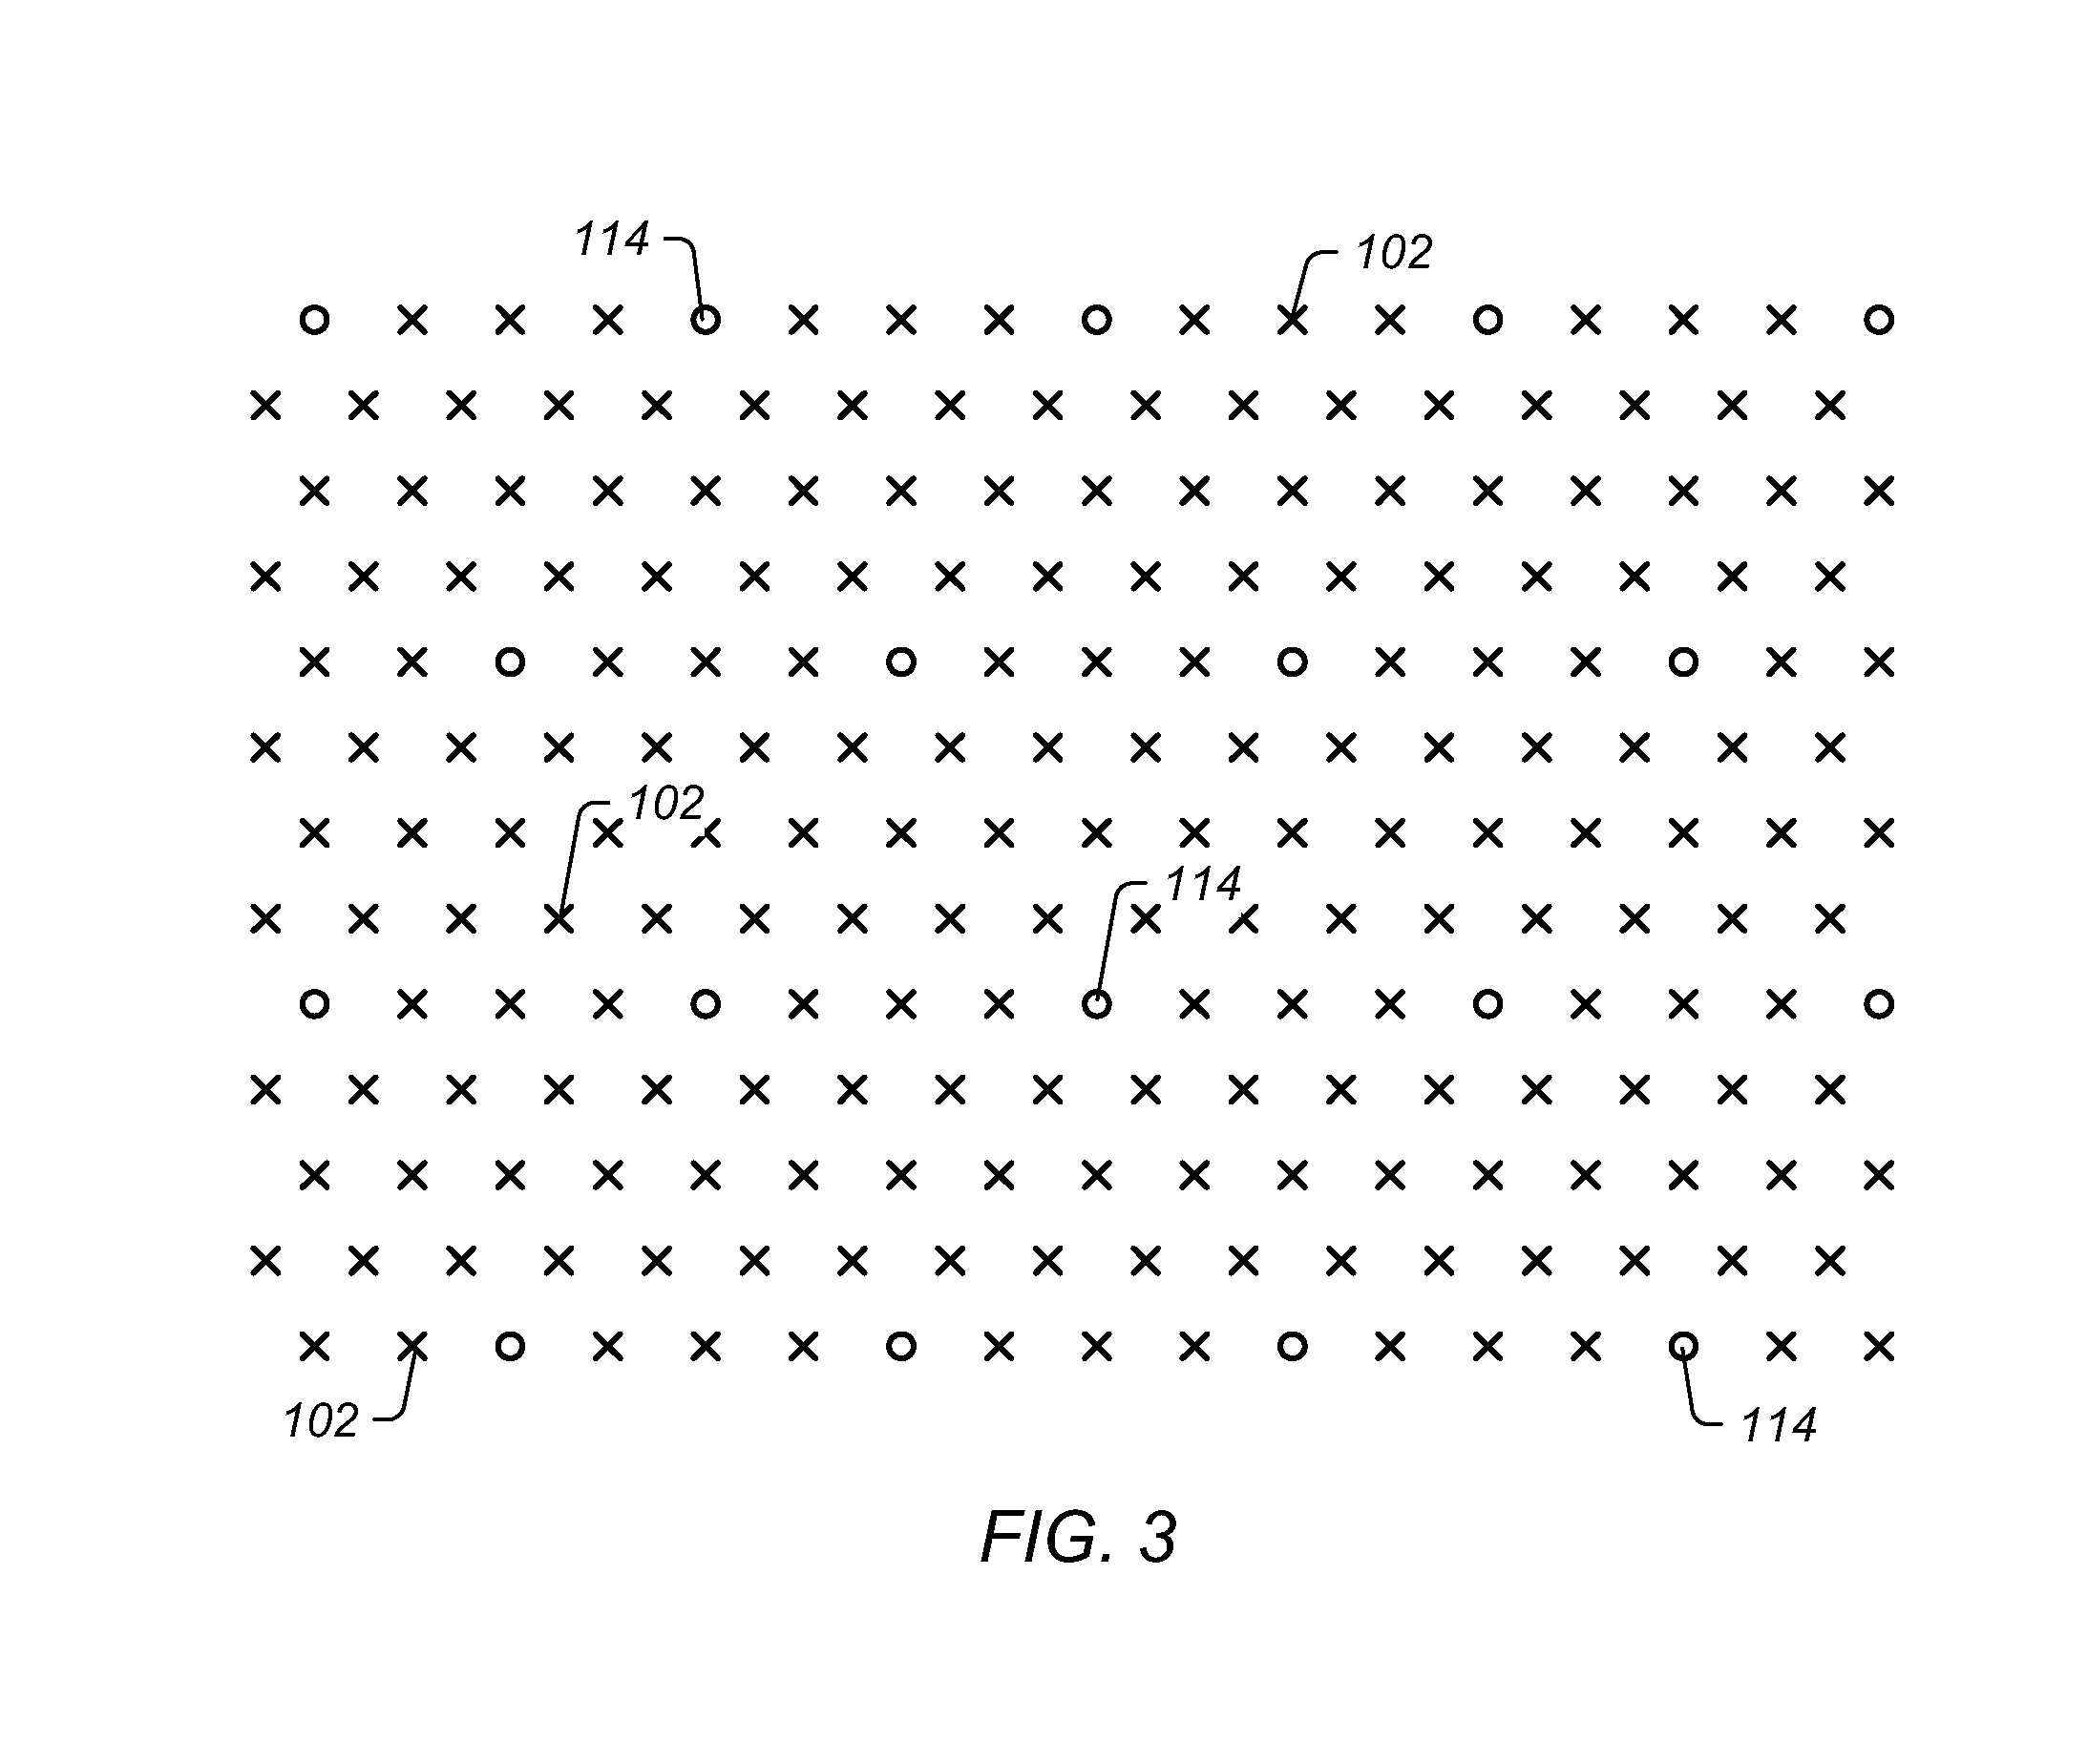 Treatment methods for nahcolitic oil shale formations with fractures